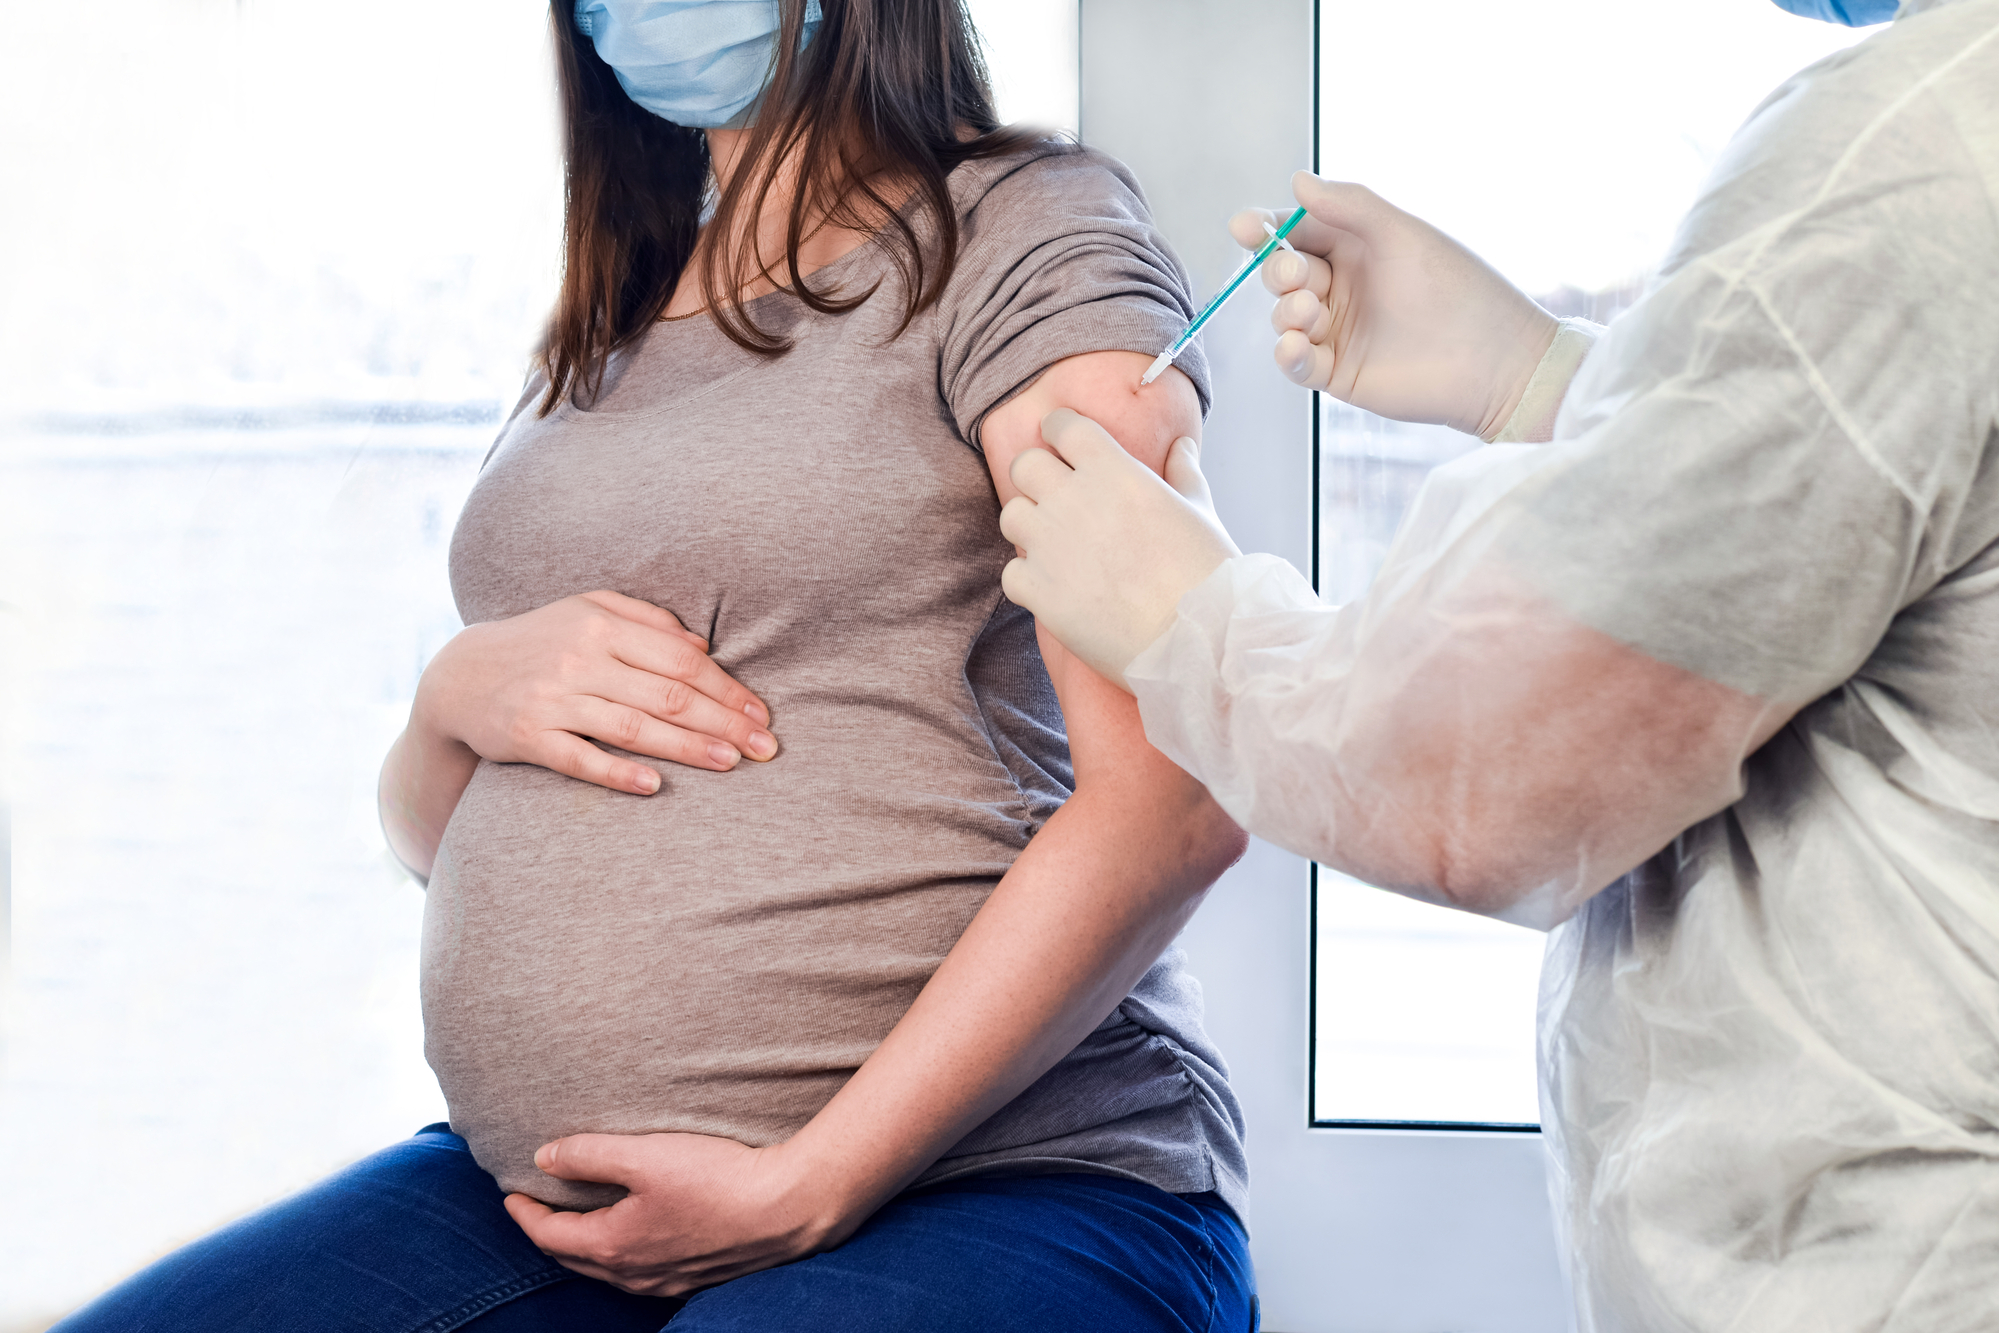 Studies Show COVID-19 Vaccines Are Safe for Pregnant and Nursing Women